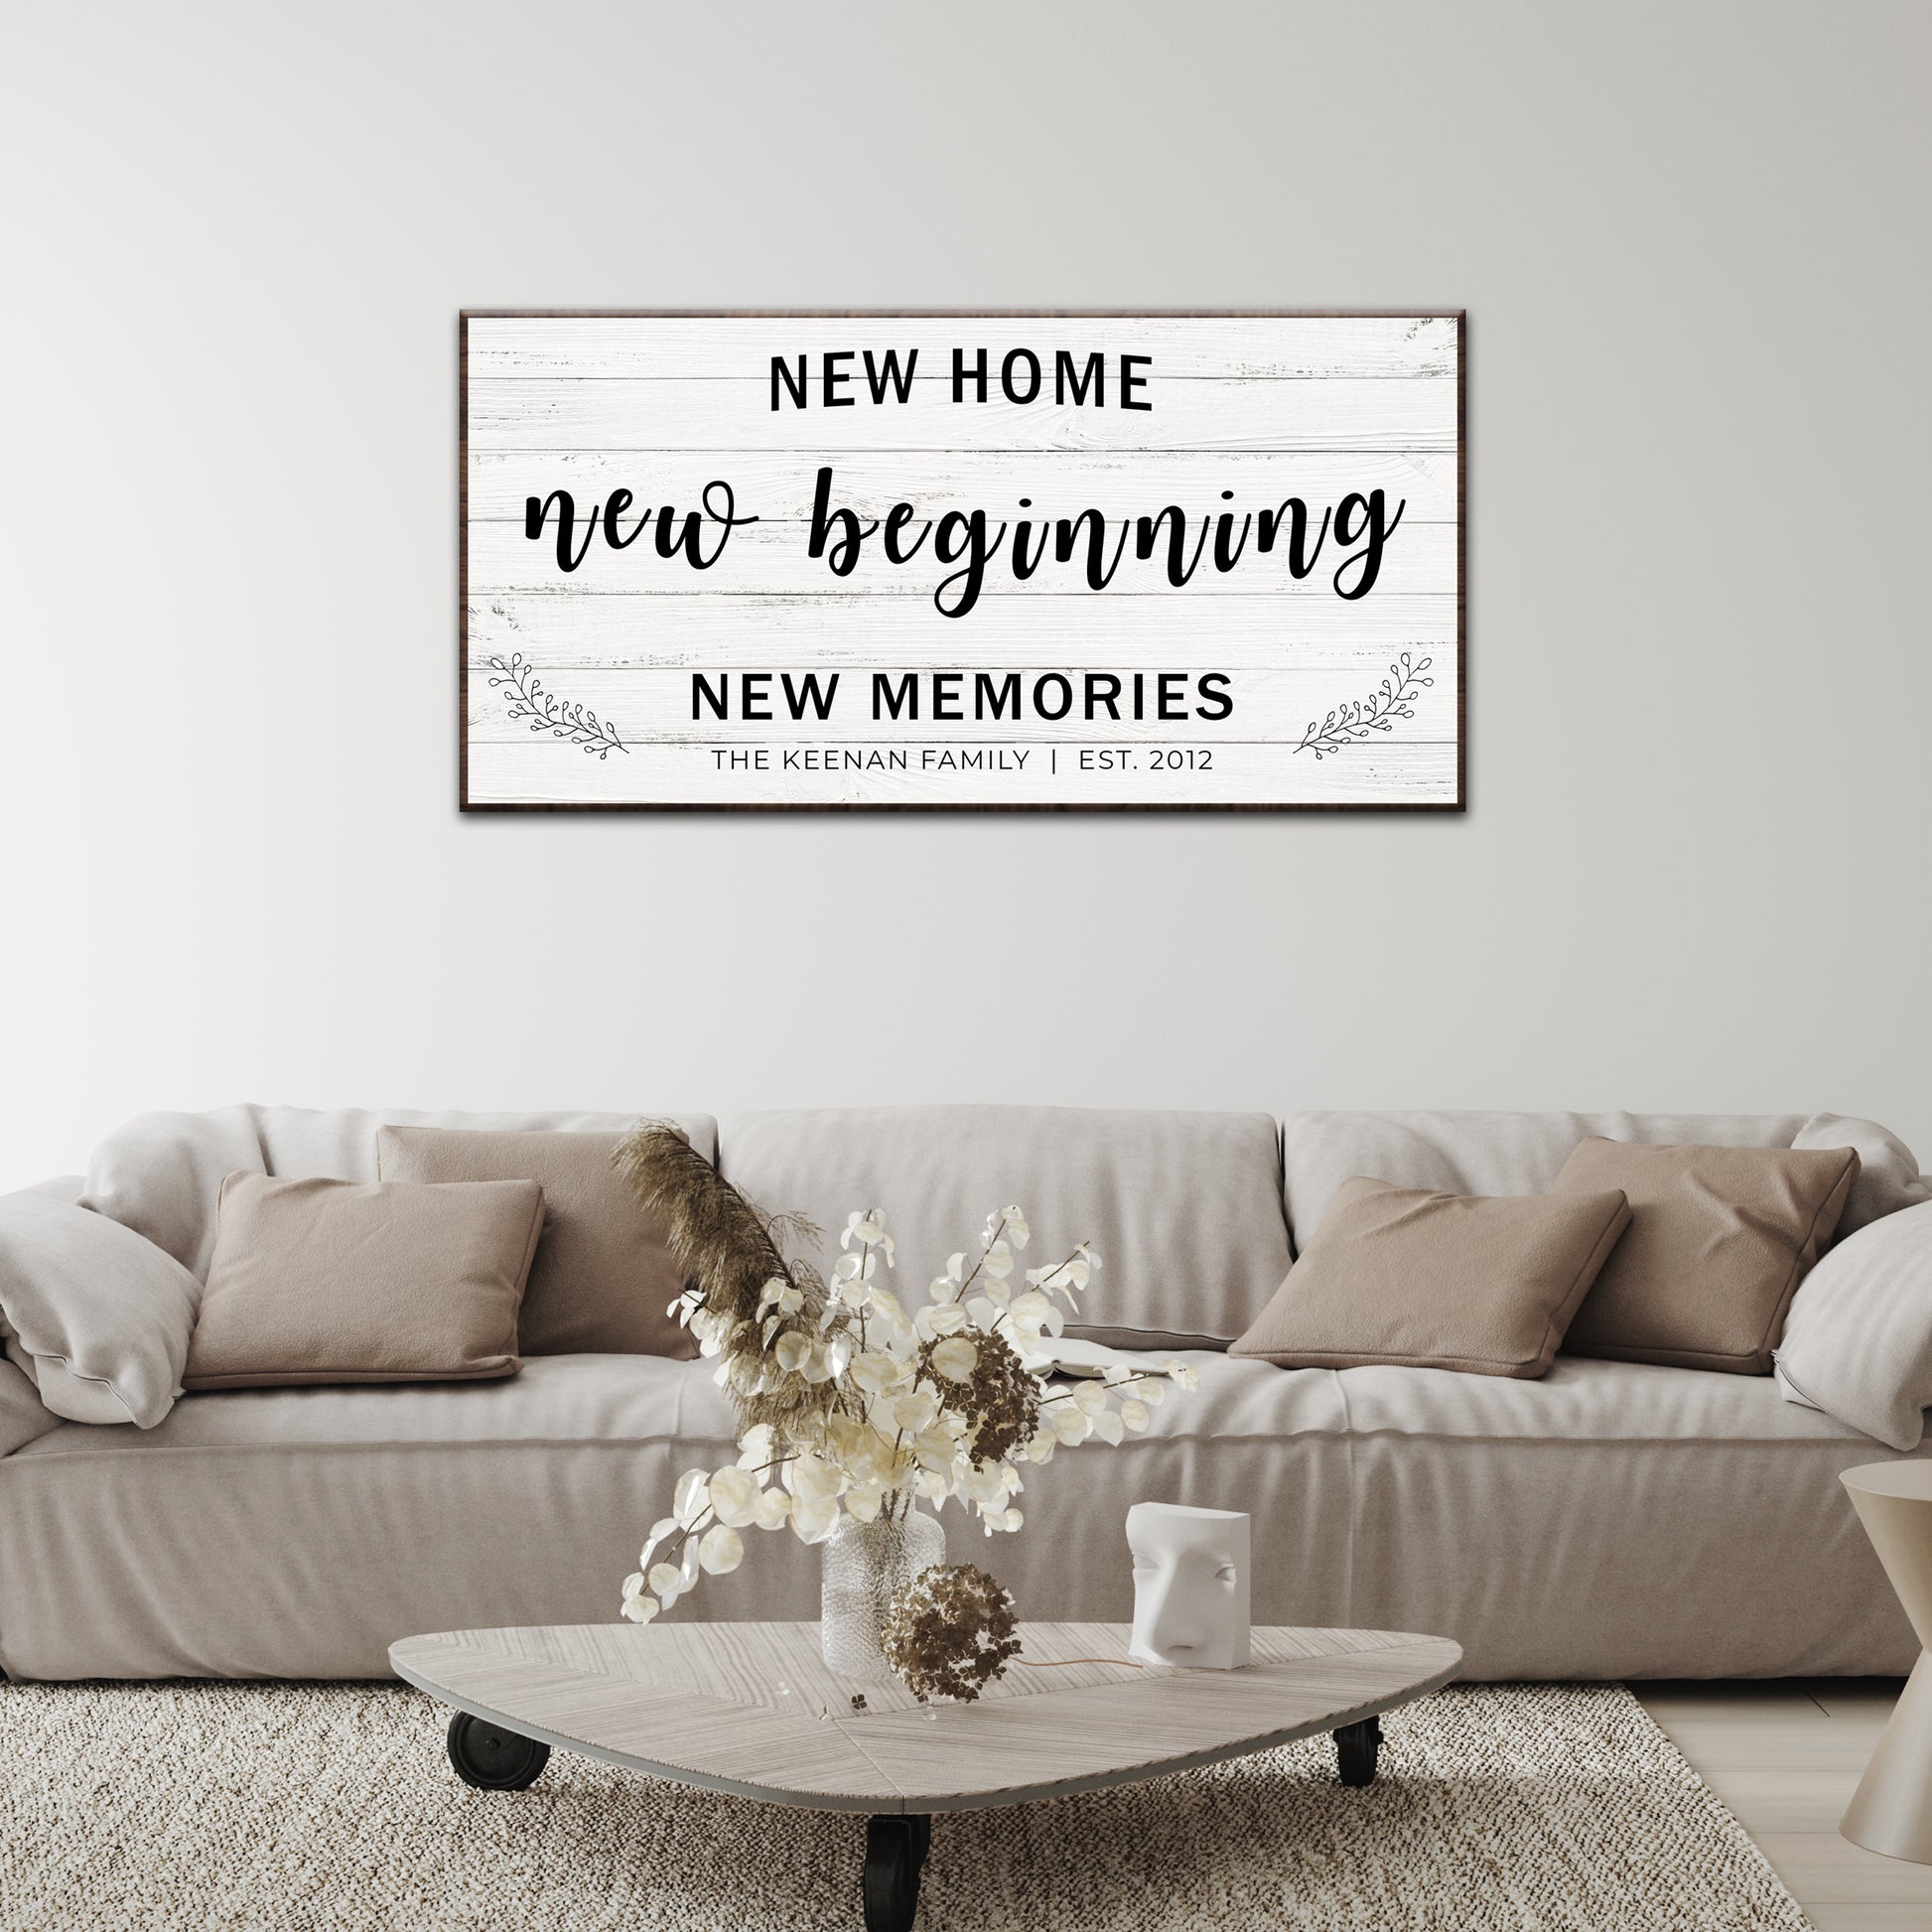 New Home, New Beginning Sign - Image by Tailored Canvases